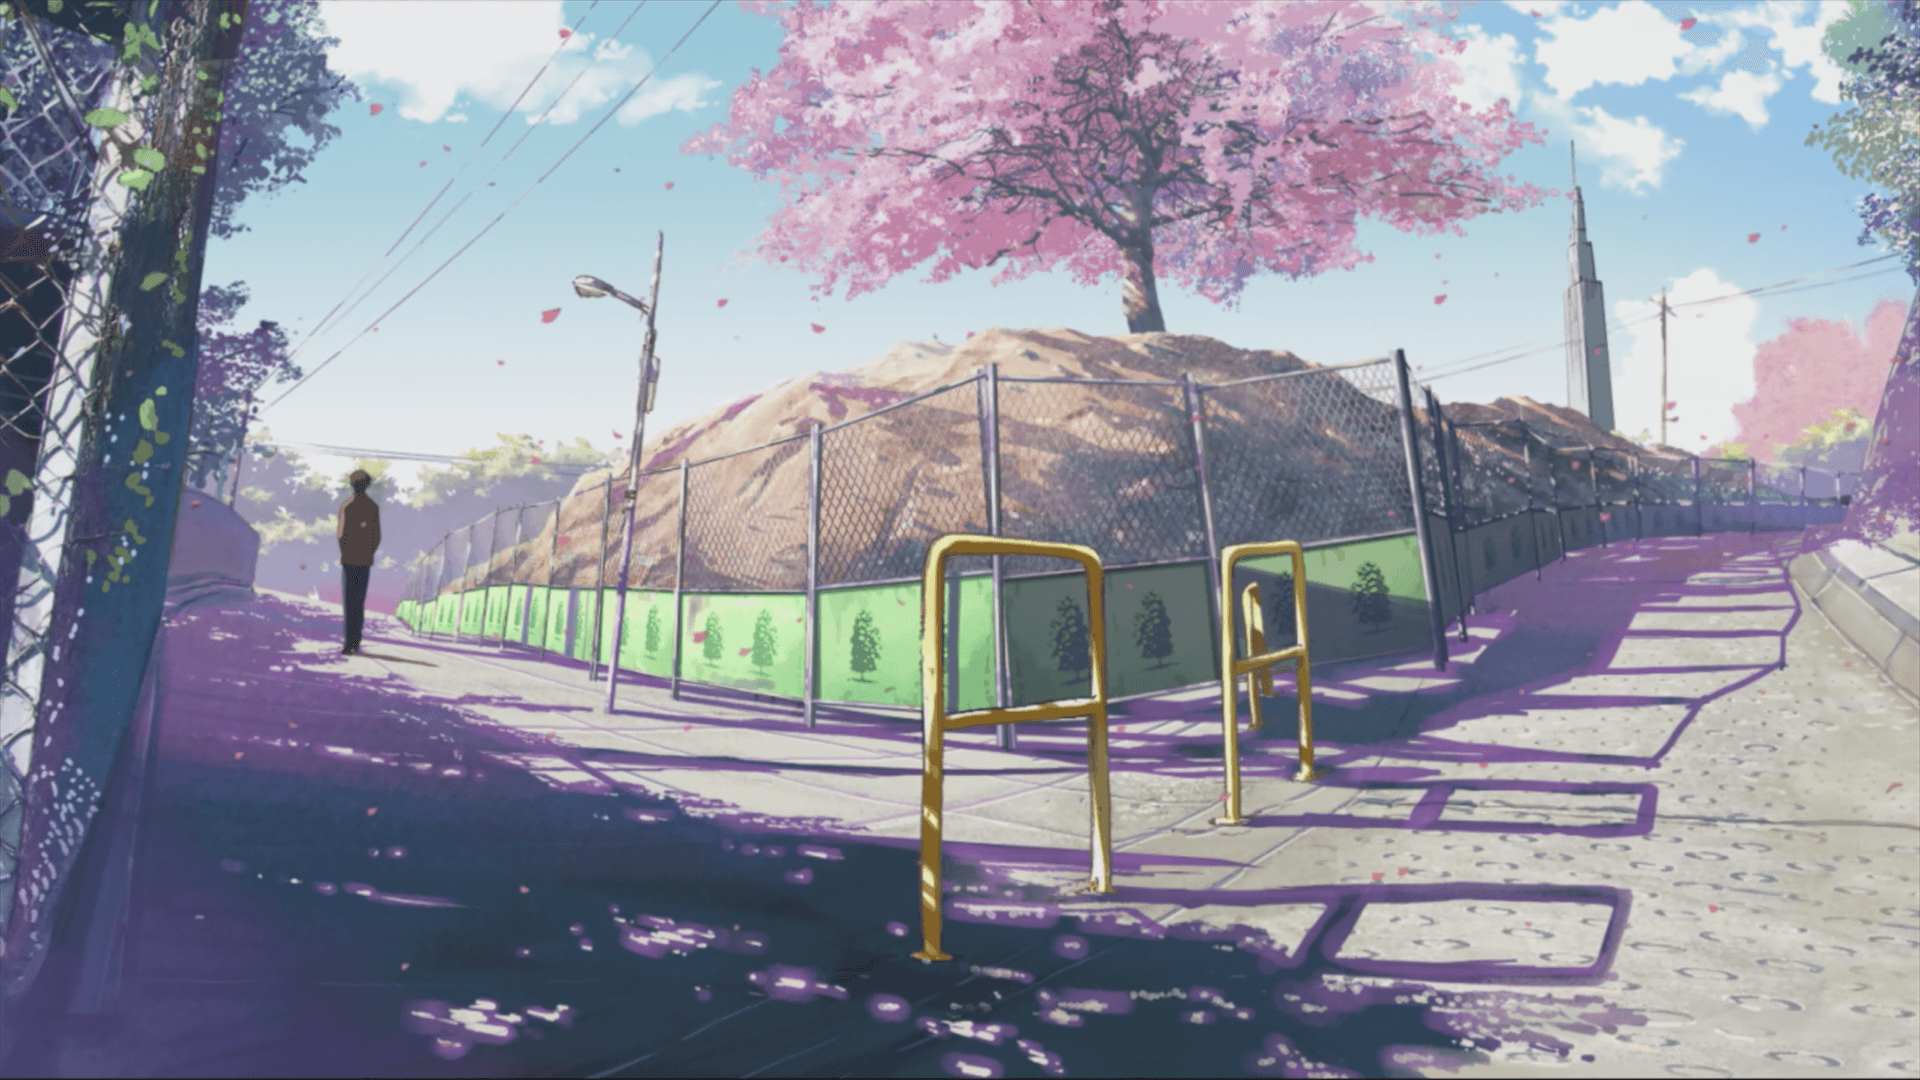 A Dreamy Depiction Of The Anime Movie 5 Centimeters Per Second.